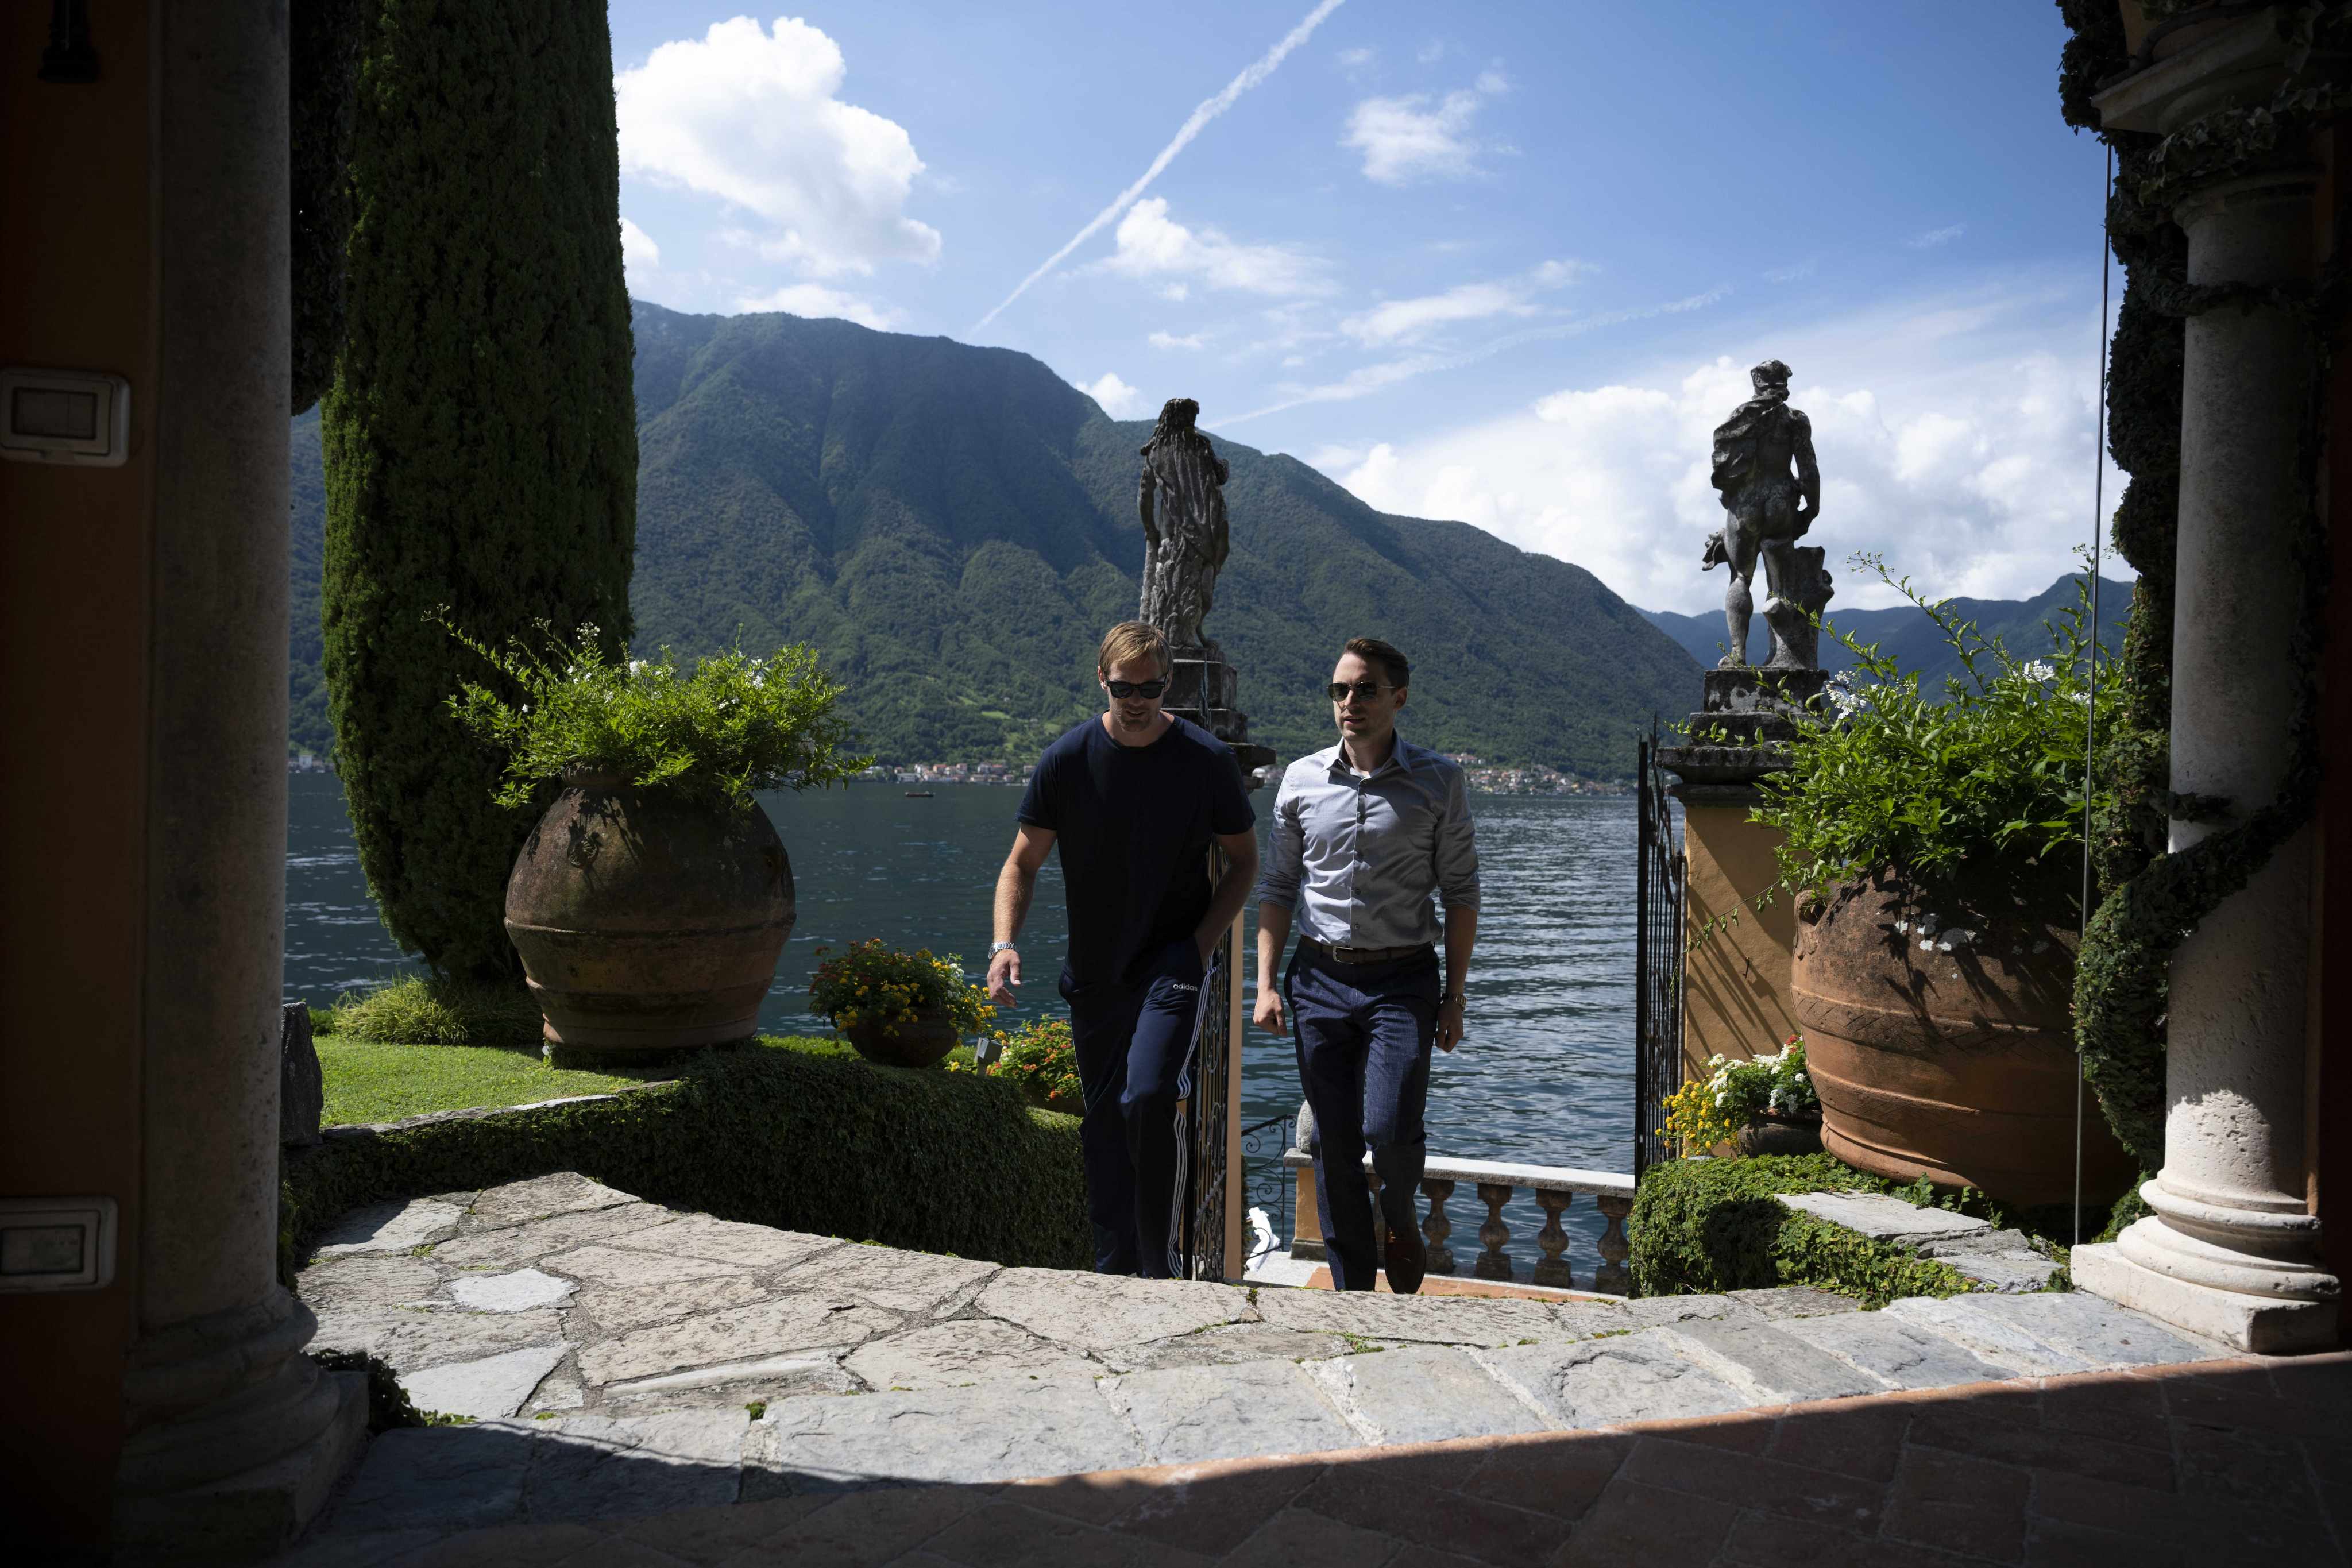 Succession’s Lukas Mattson (Alexander Skarsgard) and Roman Roy (Kieran Culkin) at Villa La Cassinella, Lake Como. It is one of the many Italian filming locations we have seen on our screens this year. Photo: HBO Go